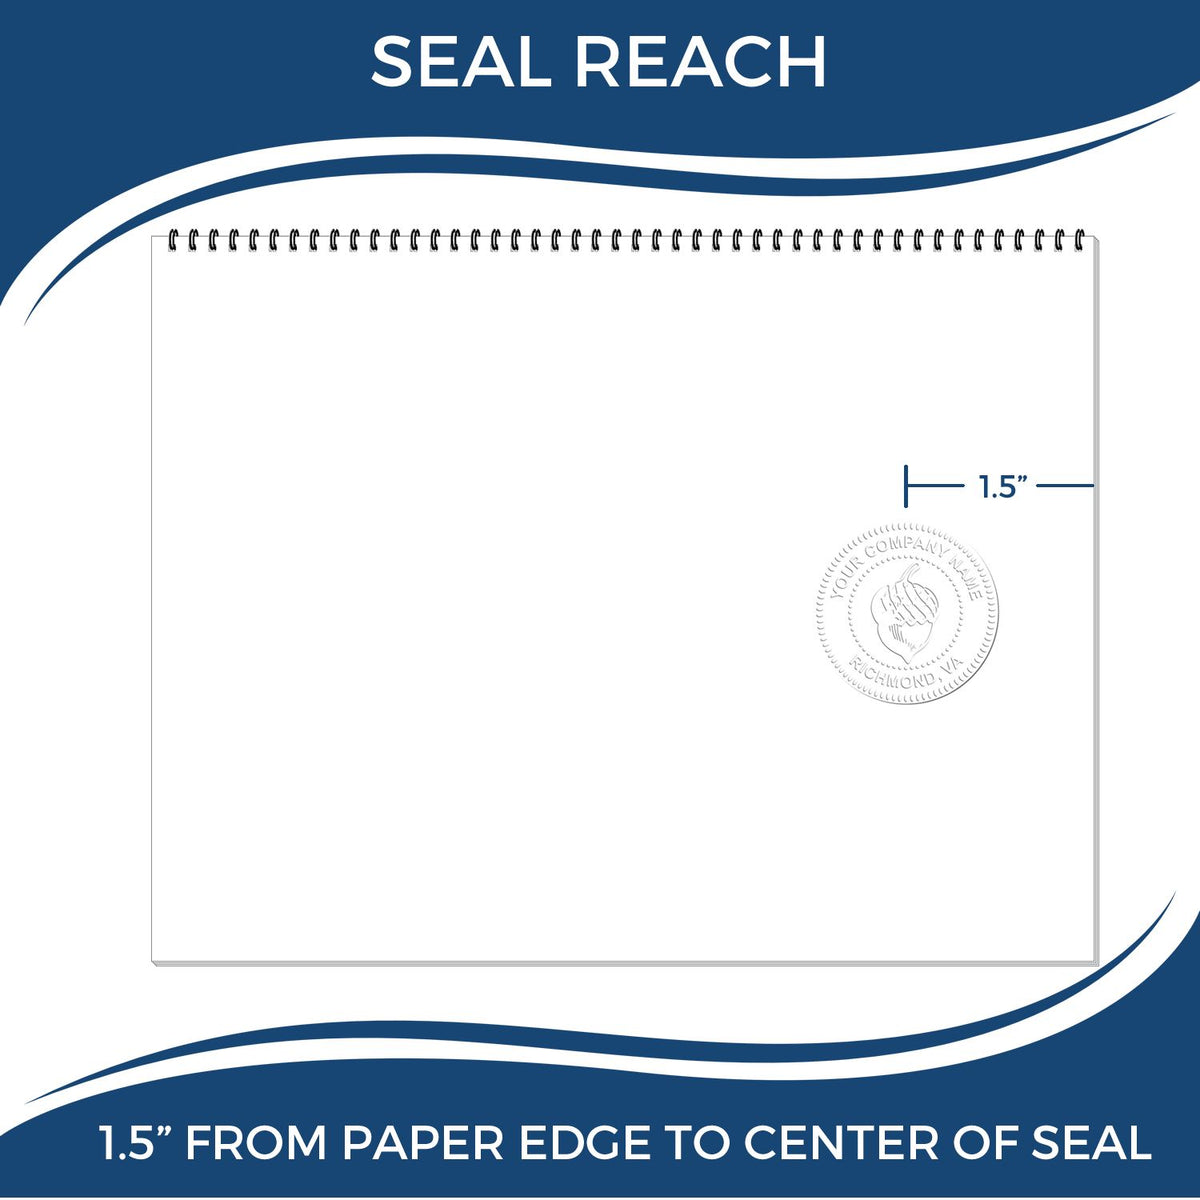 An infographic showing the seal reach which is represented by a ruler and a miniature seal image of the Soft Pocket Hawaii Landscape Architect Embosser